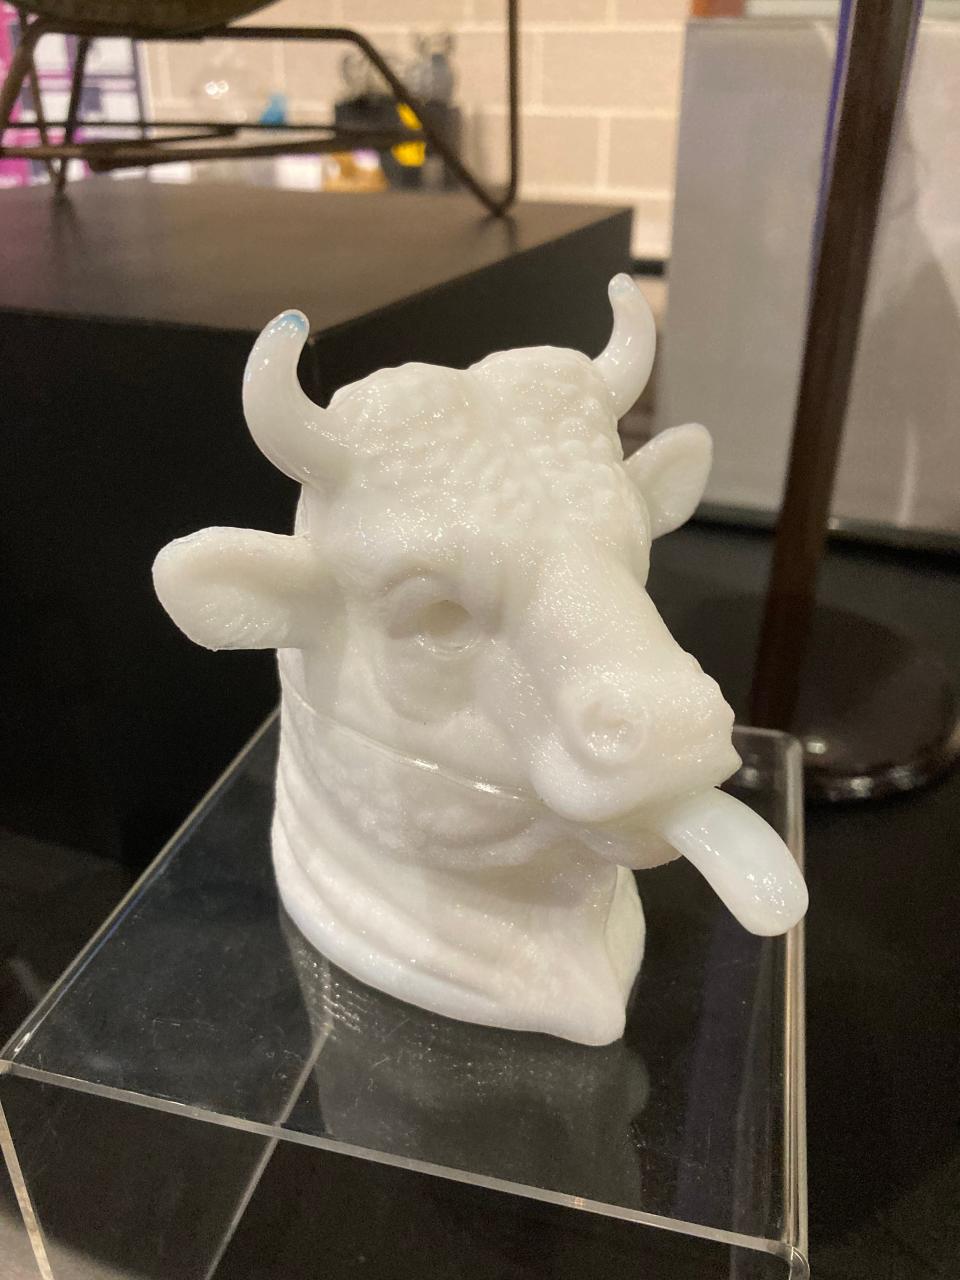 This piece of art that features a cow sticking out its tongue is among the varied artifacts from the collection of McKinley Presidential Library & Museum on display in the new Keller Gallery exhibition, "A Constellation of Objects."